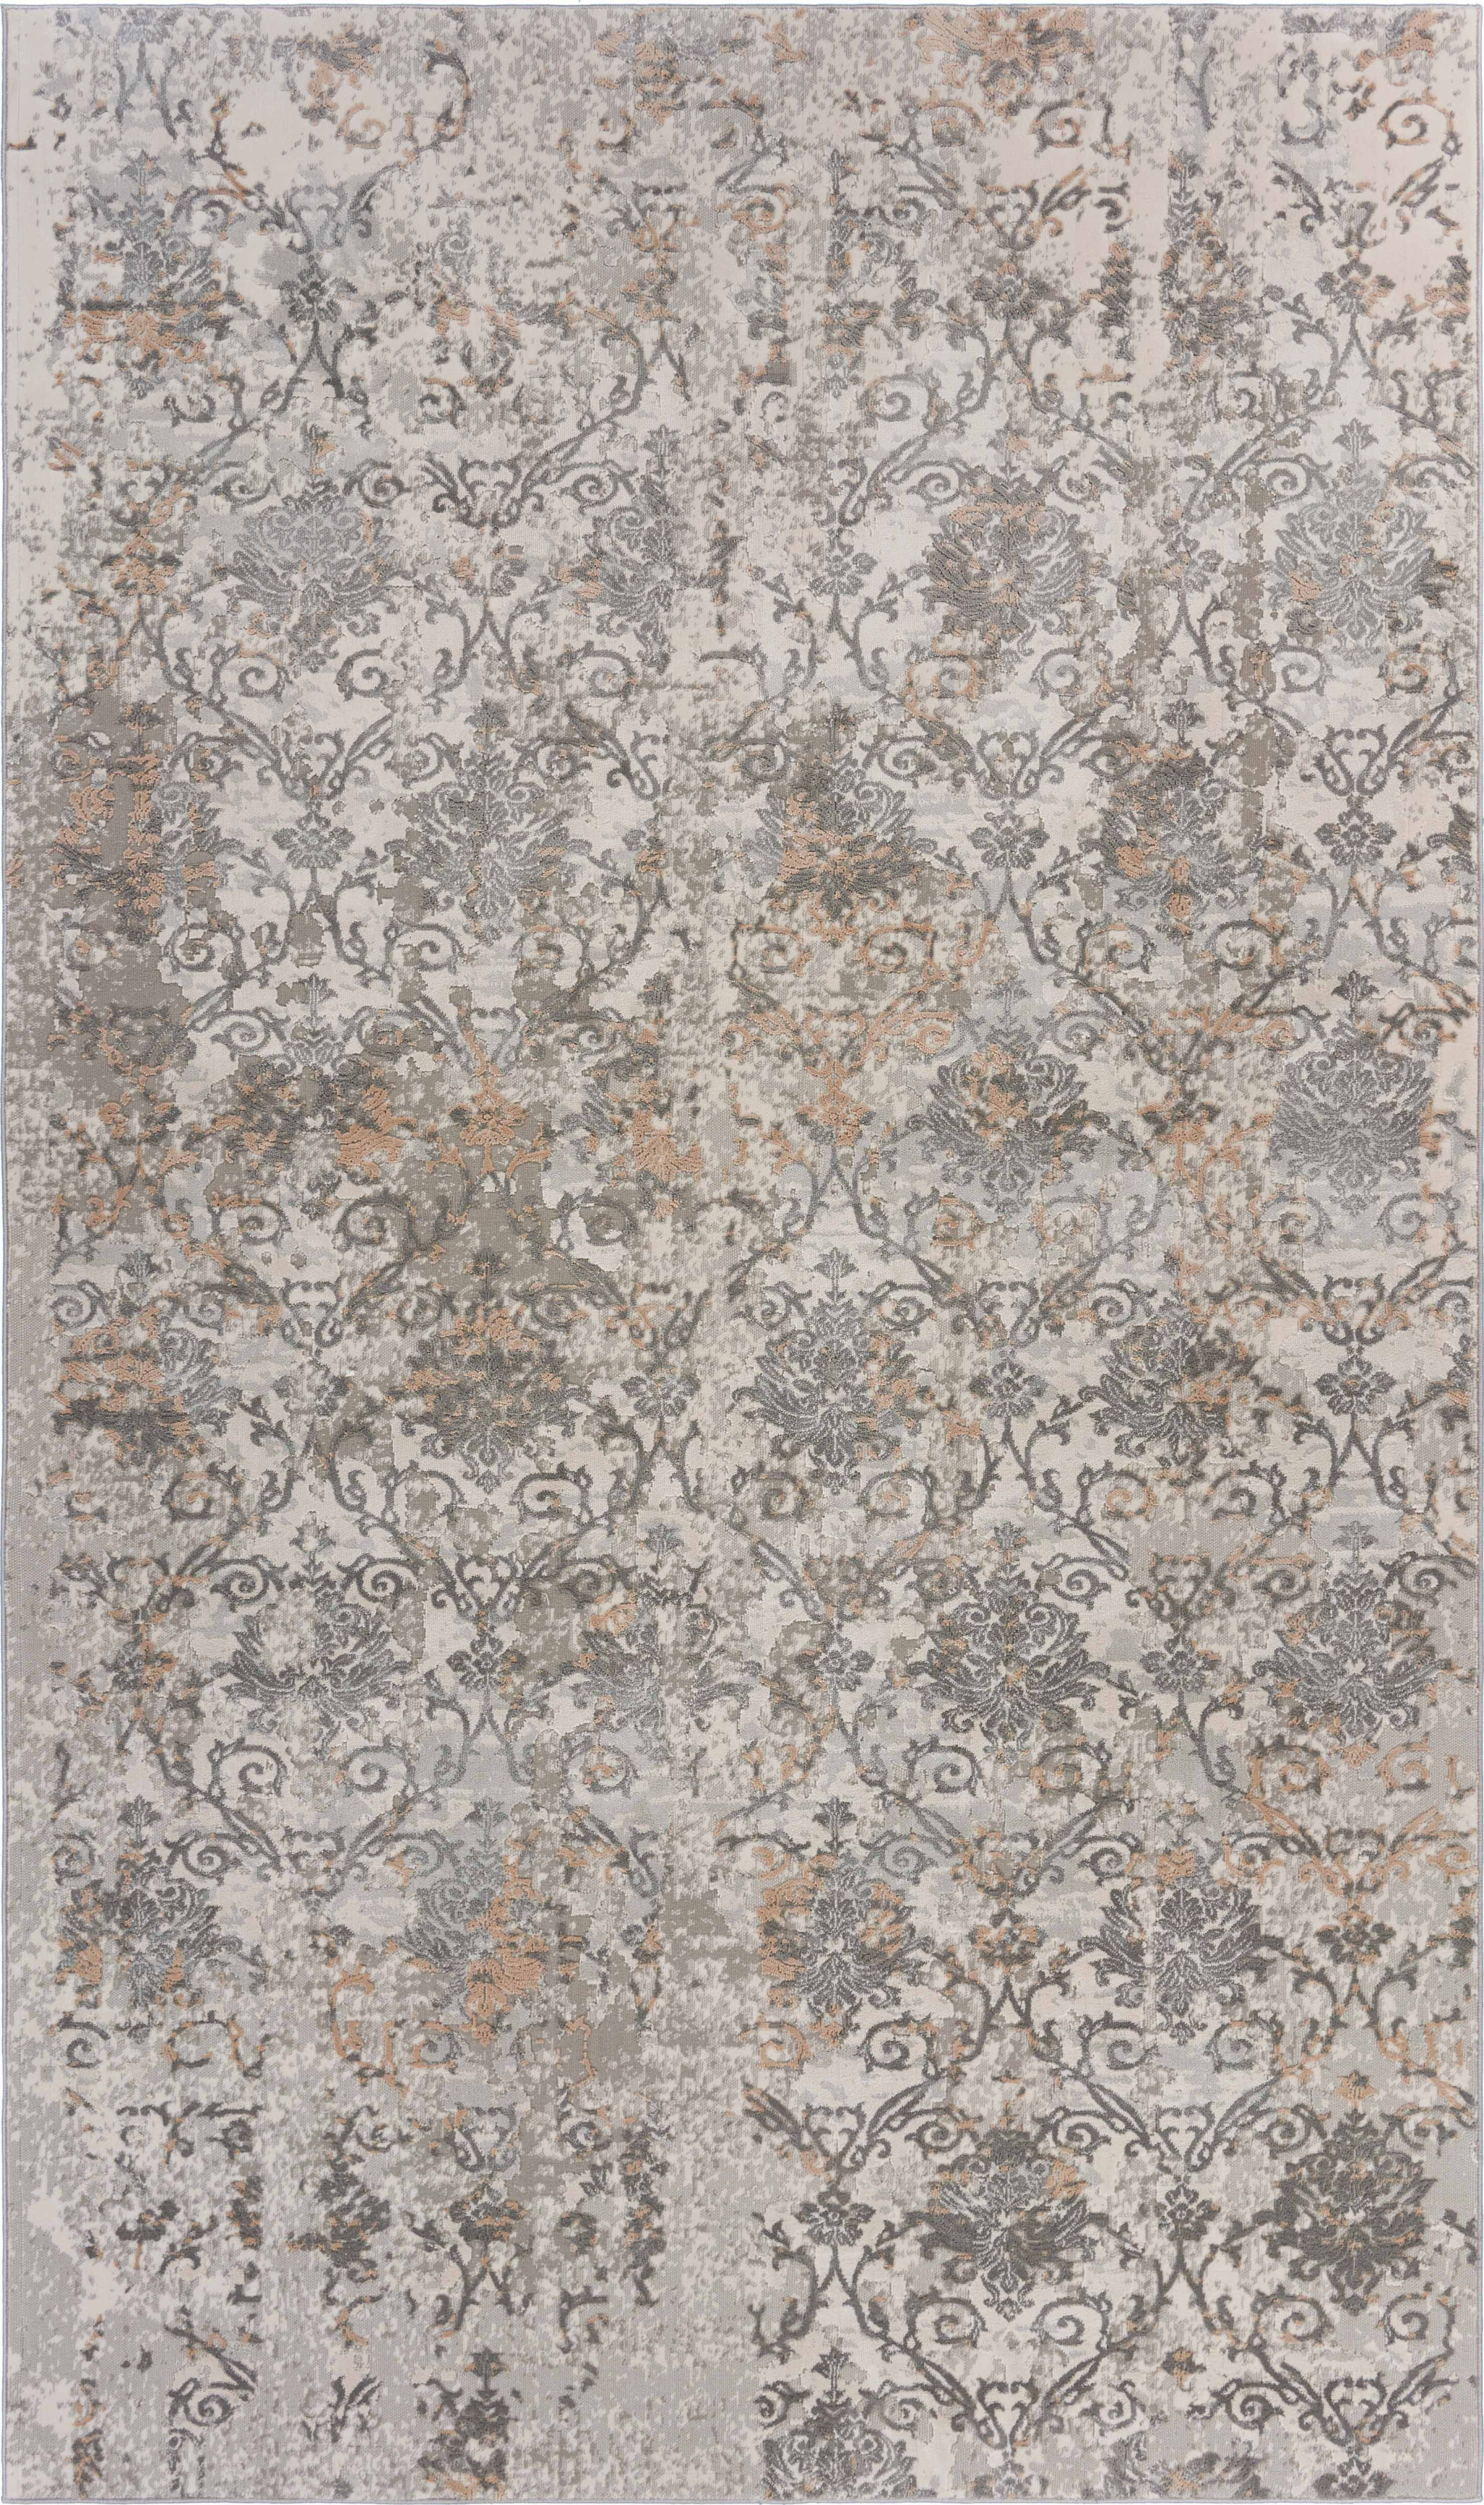 10' X 14' Cream Abstract Distressed Area Rug-515988-1